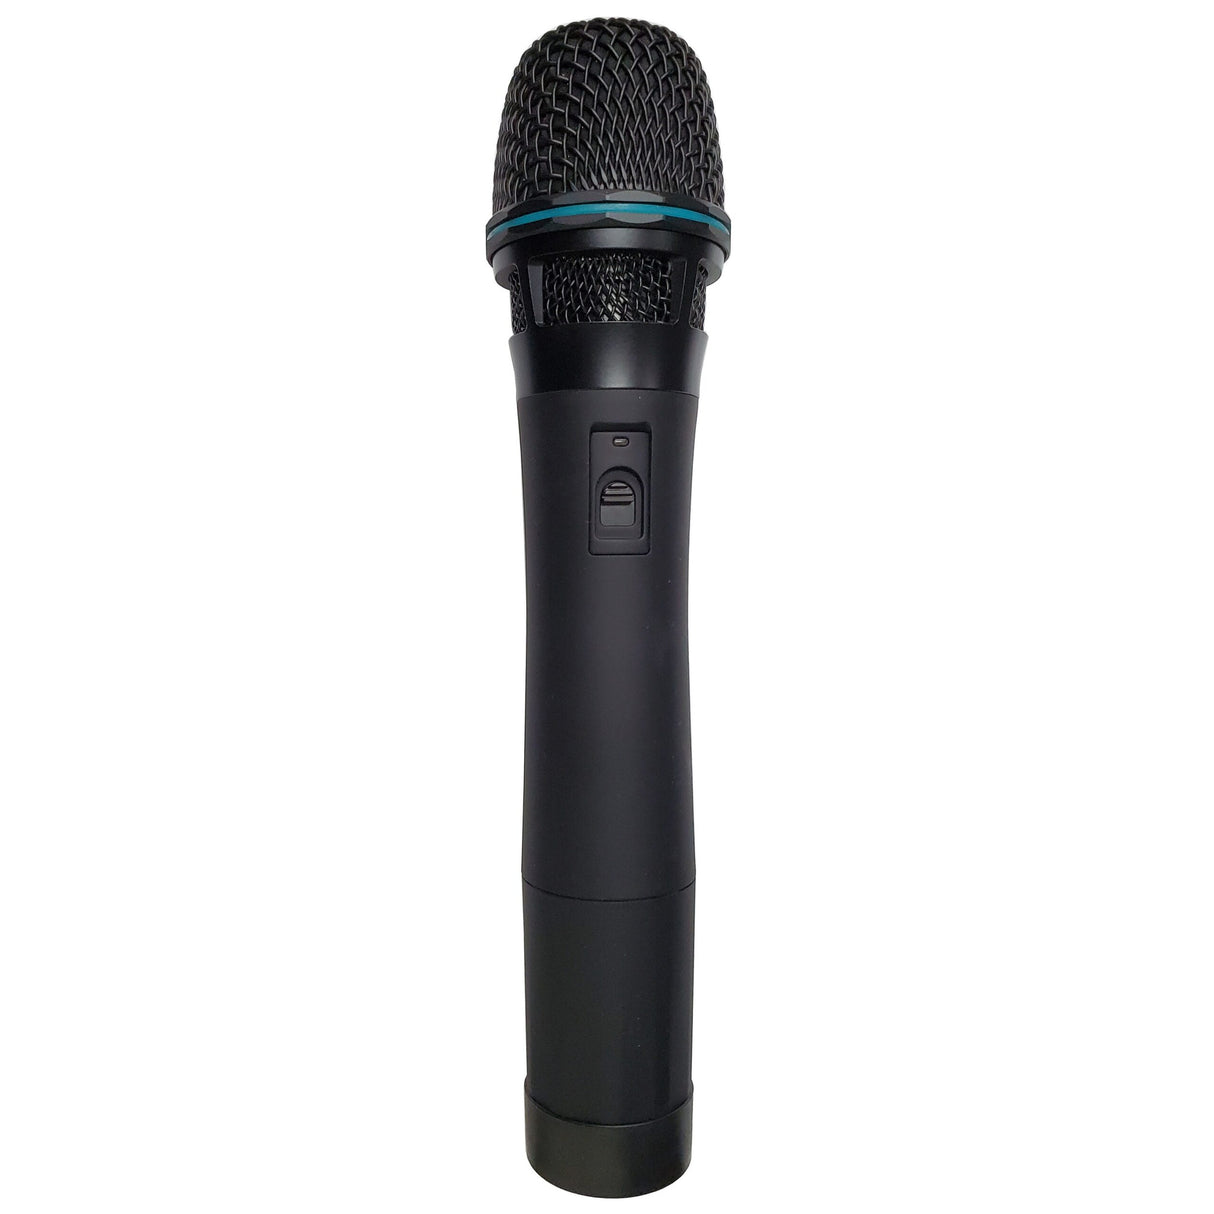 MIPRO ACT-707HE Cardioid Condenser Handheld Transmitter Microphone, 6A Band